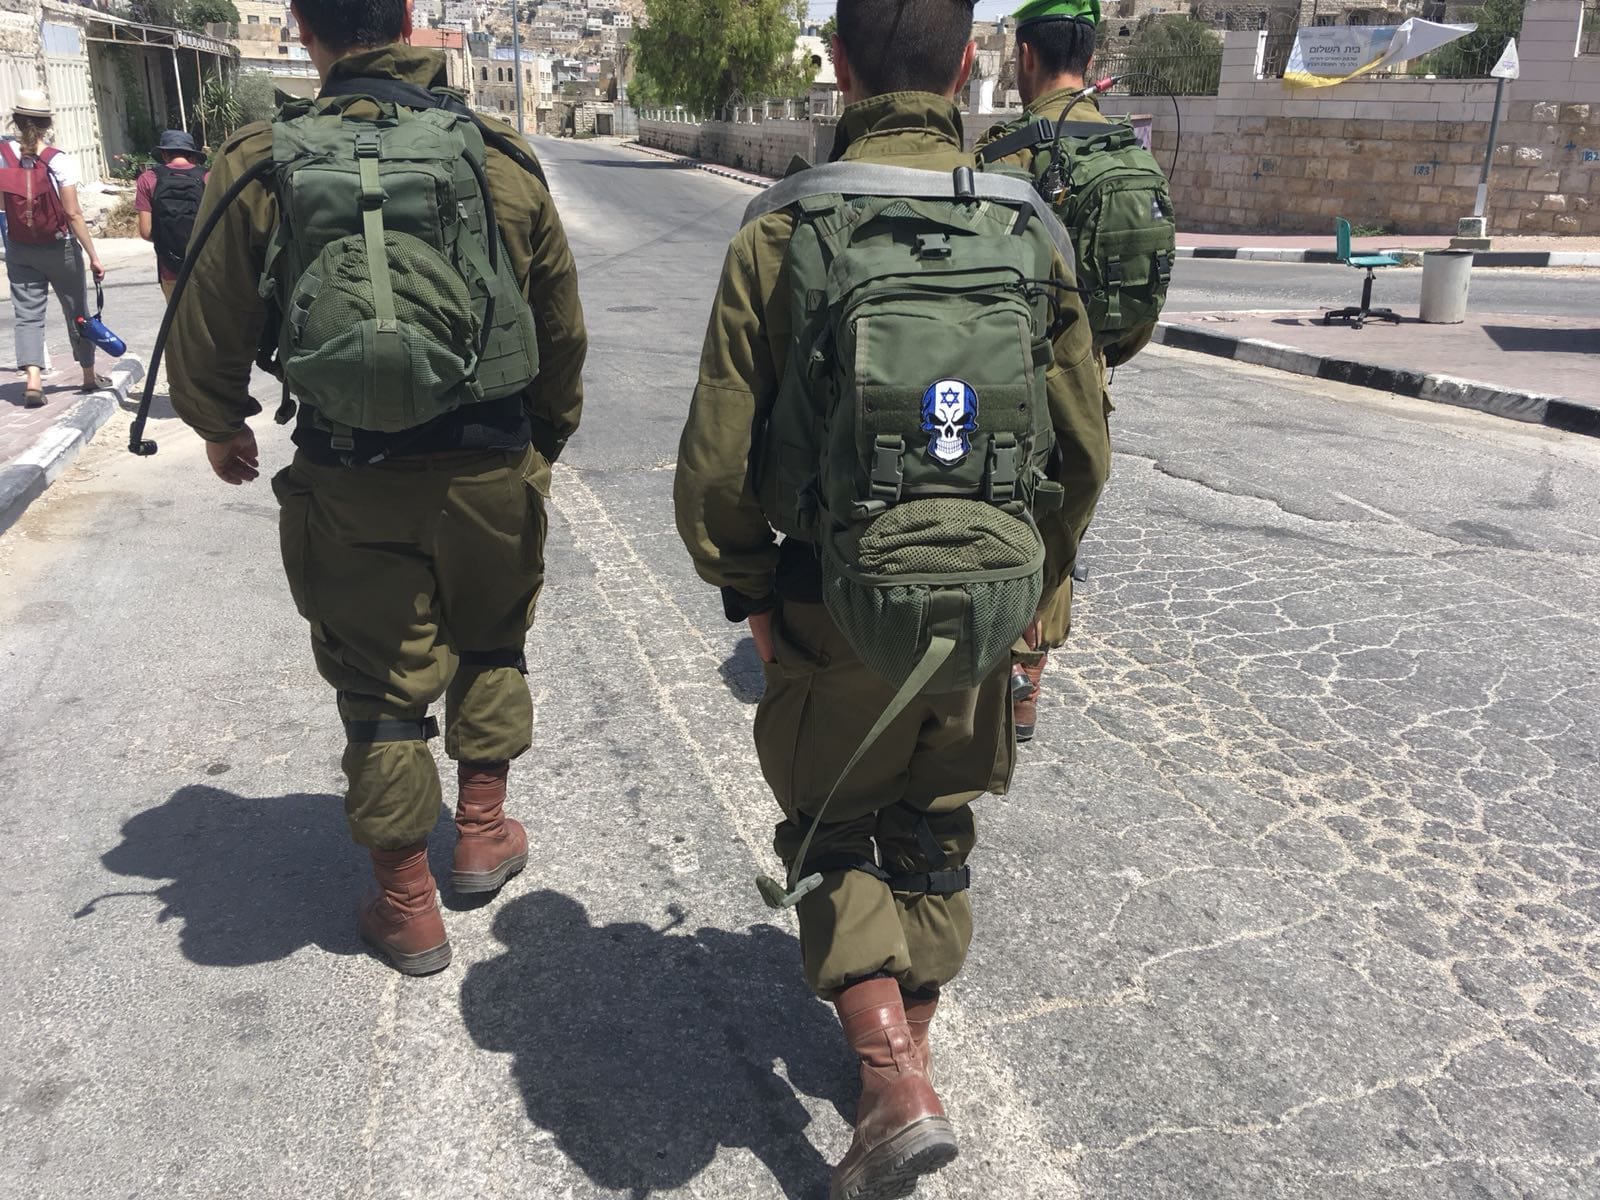 An Israeli soldier carrying a backpack with a Skull/Israeli Star of David insignia. (Uri Givati)